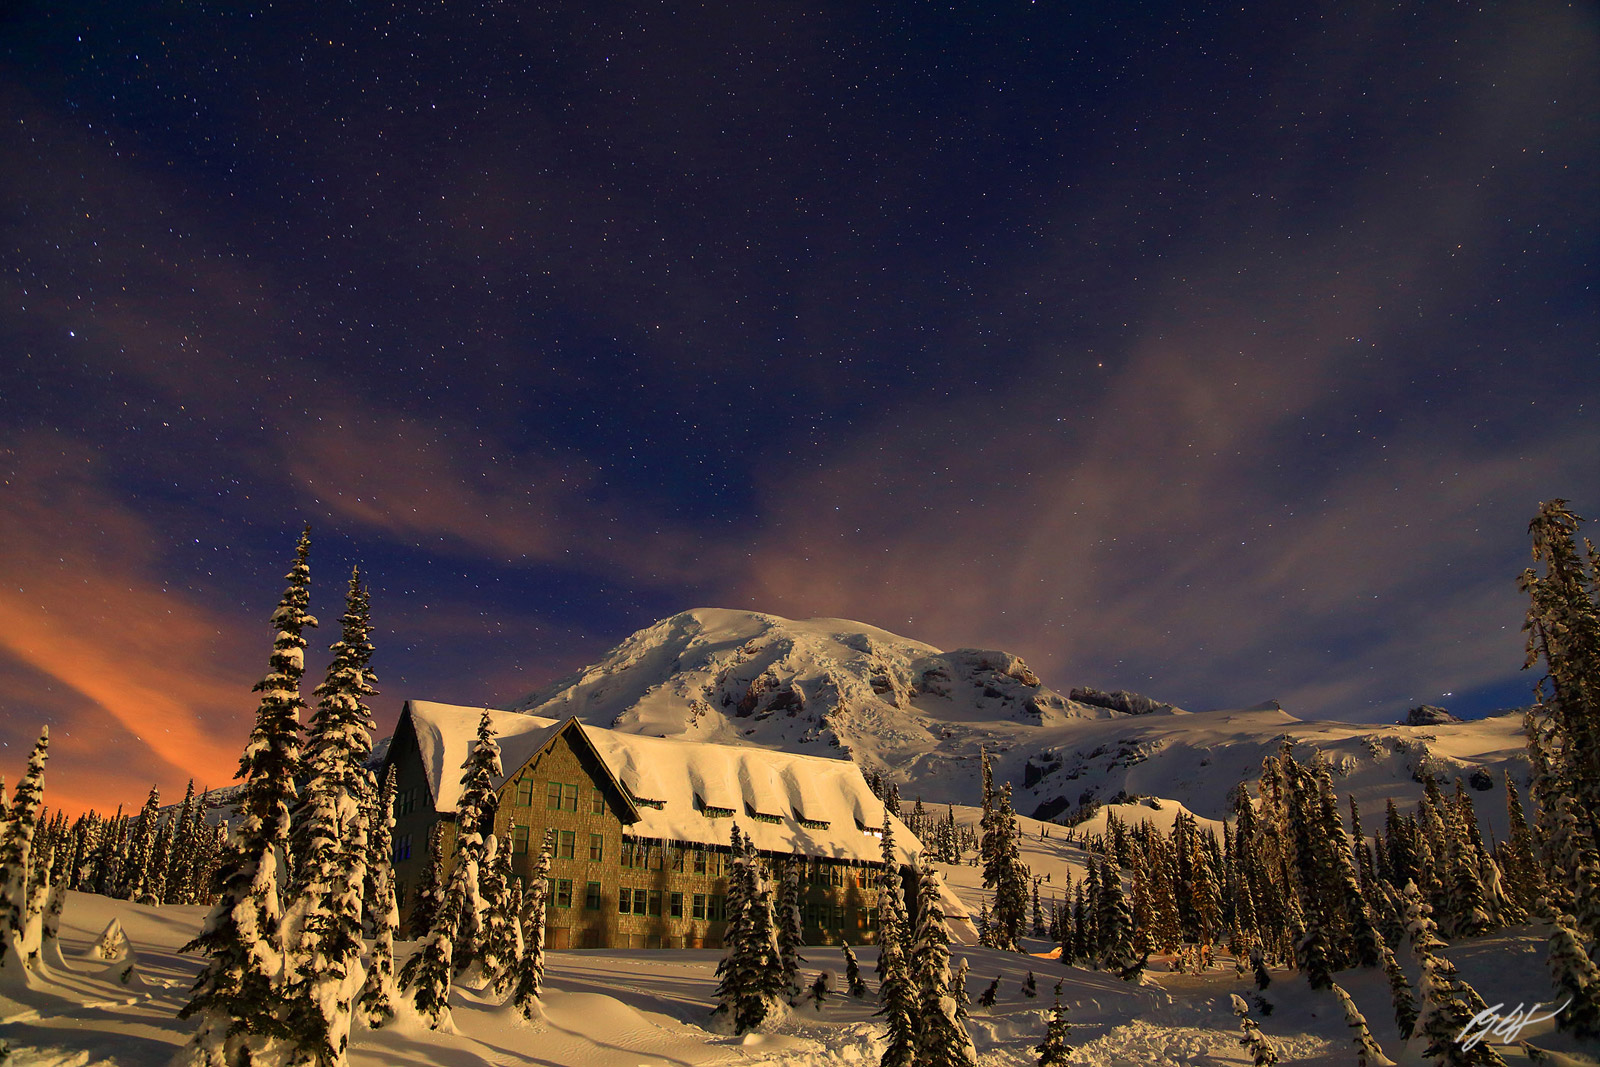 Paradise Lodge and Stars at Night in Mt Rainier National Park in Washington